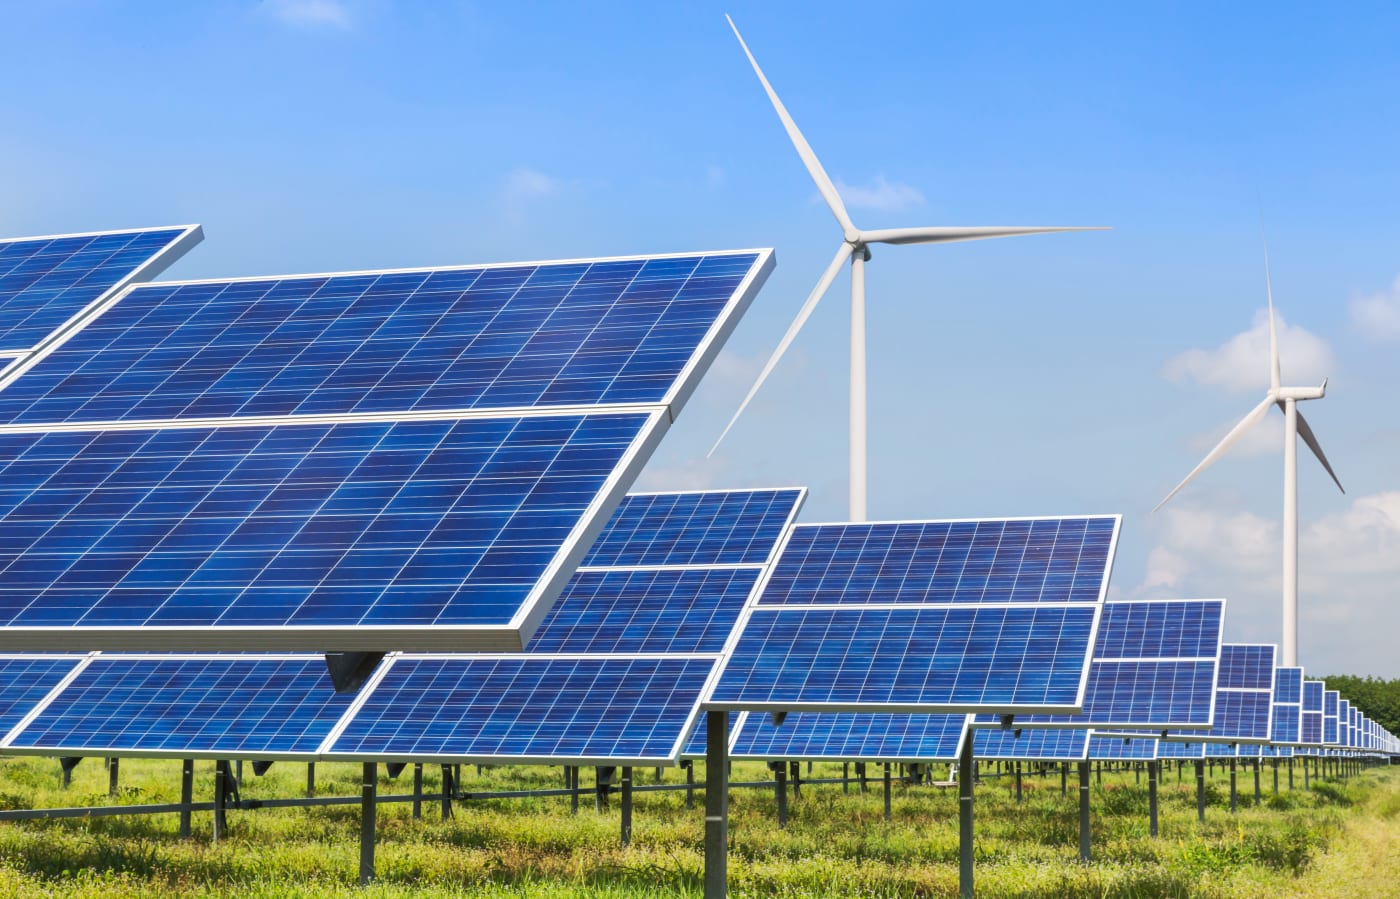 Solar panels and wind turbines generating electricity in solar power station